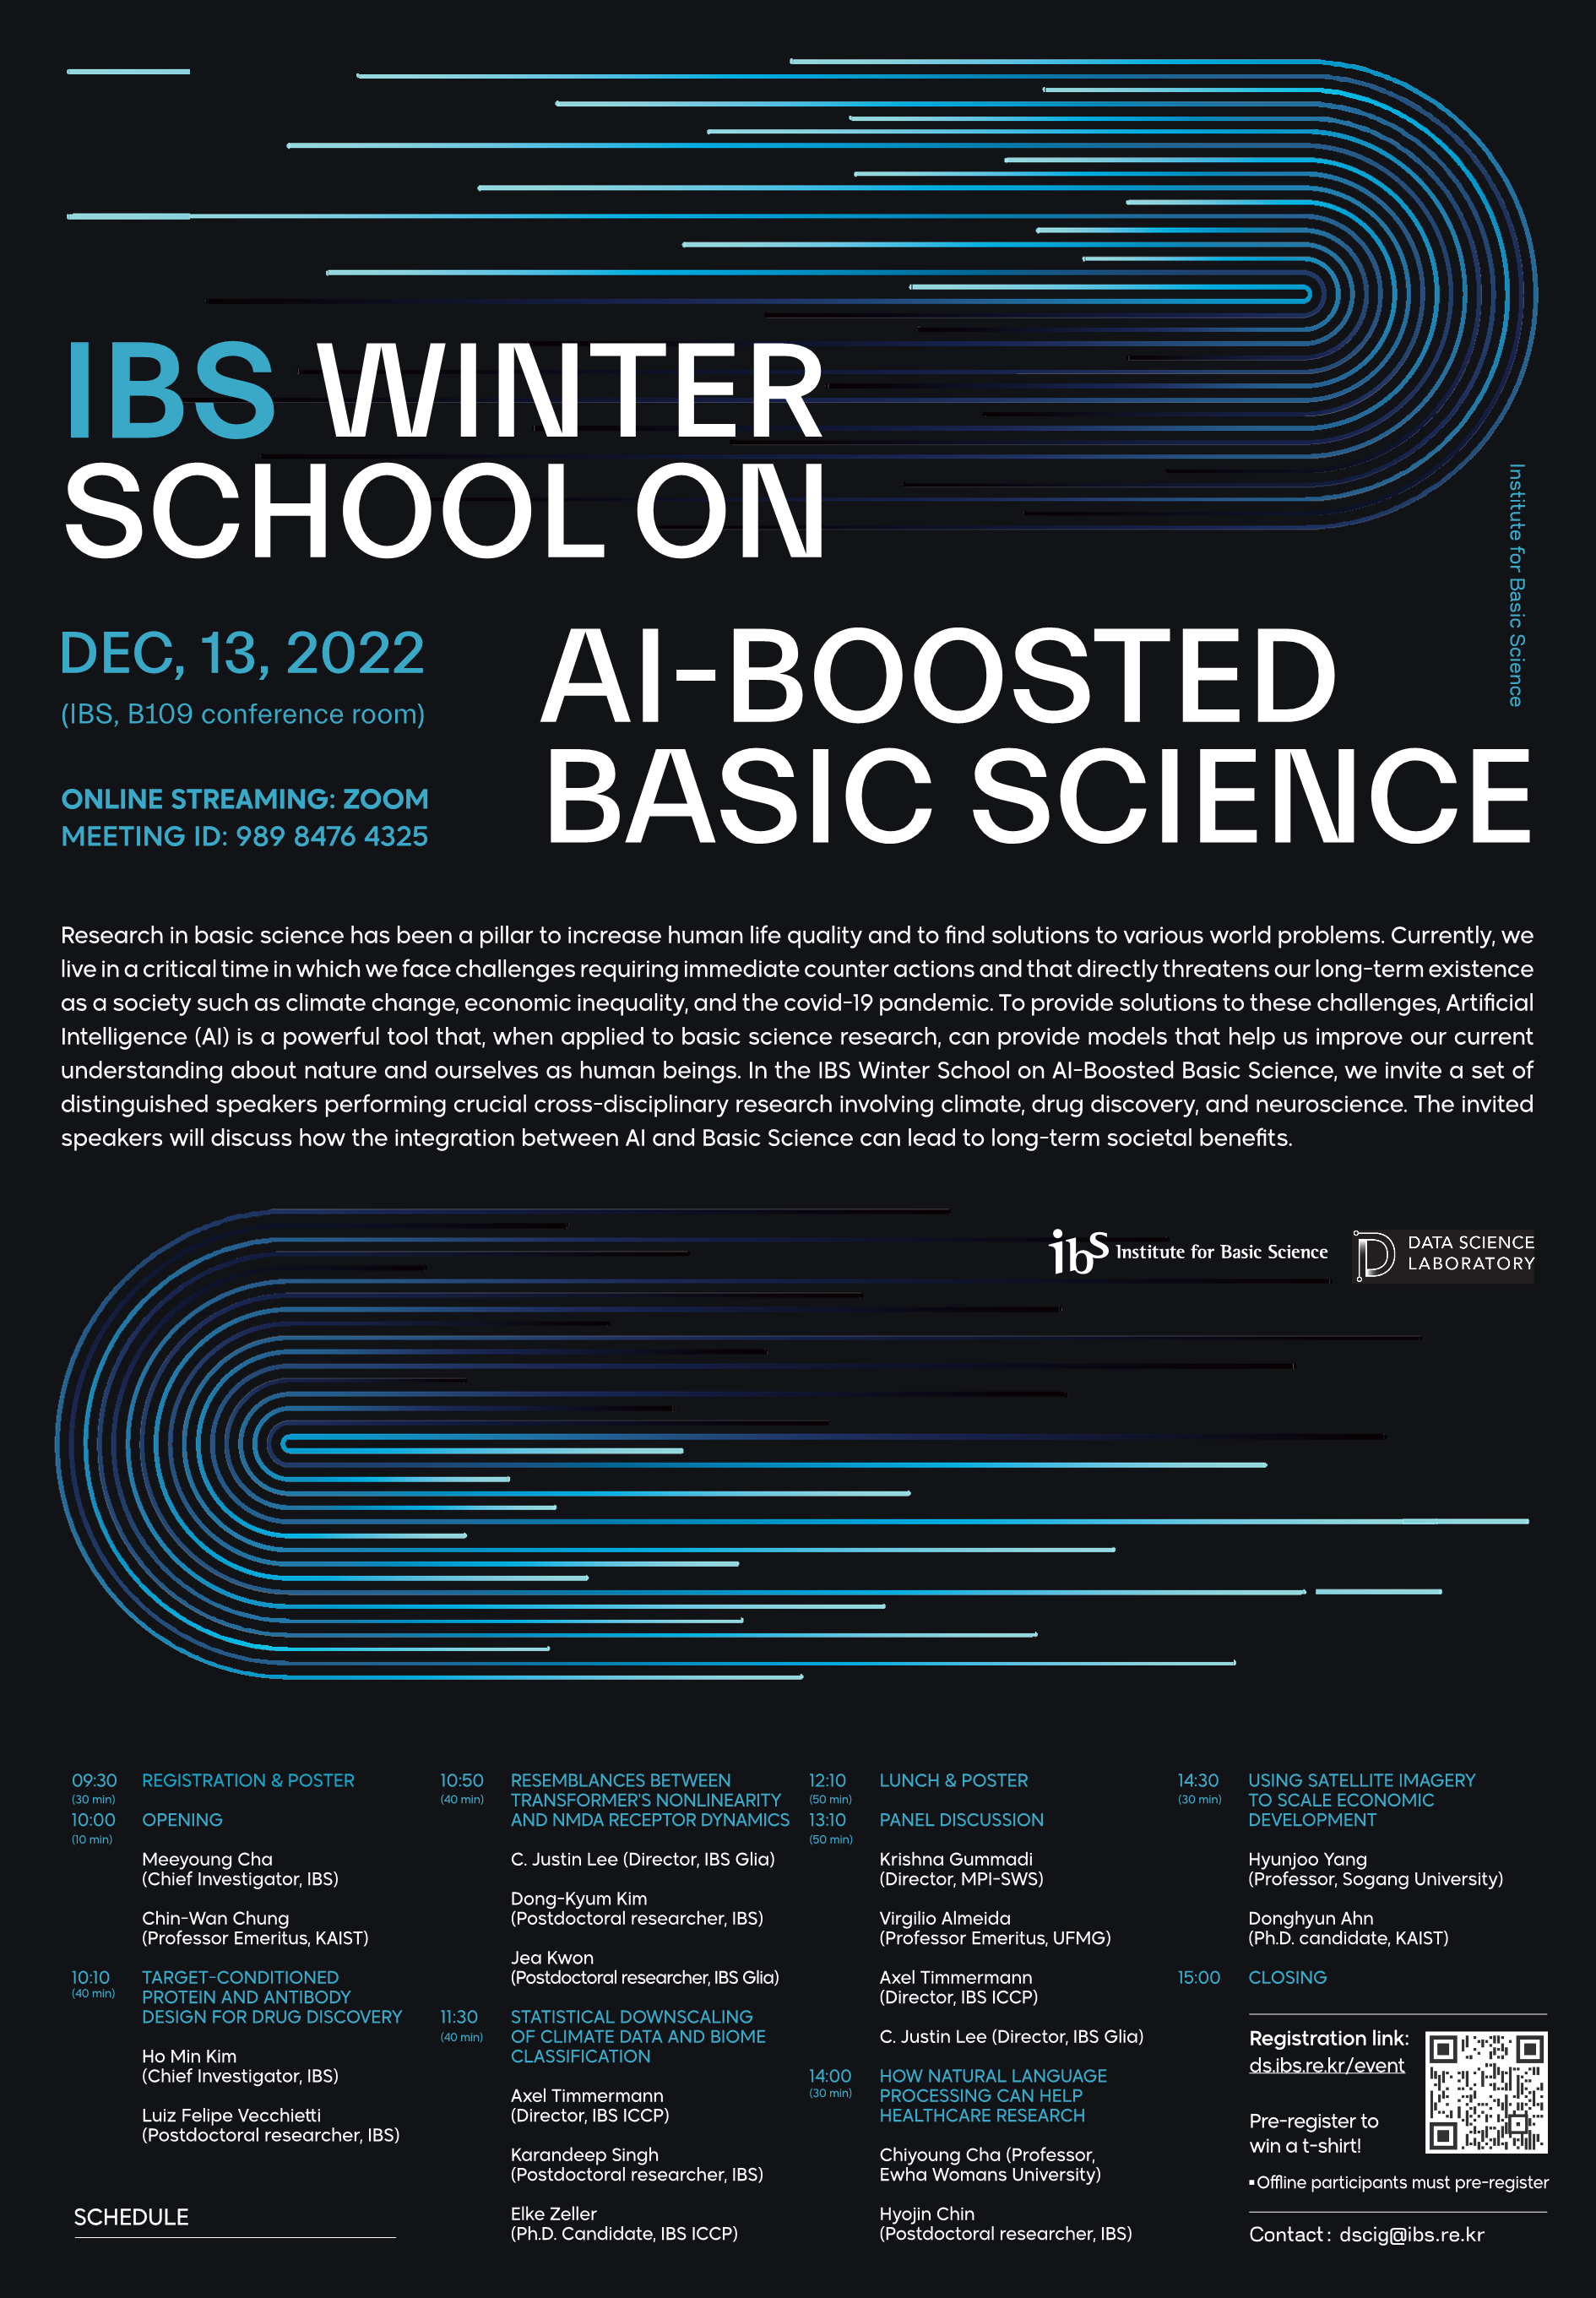 IBS Winter School on AI-Boosted Basic Science 

Basic science research has been a pillar in improving human life quality and finding solutions to various global challenges. In finding solutions to these challenges, artificial intelligence (AI) has been a powerful tool that, when applied to basic science research, can provide models that help us improve our current understanding of nature and ourselves as human beings. At this event, hosted by the IBS Data Science Group, we invite a set of distinguished speakers performing crucial cross-disciplinary research involving climate, drug discovery, and neuroscience. The invited speakers will discuss how integrating AI and basic science can bring long-term societal benefits.

Date: December 13, 2022 (Tuesday) 10:00 - 15:00
Place: IBS B109 conference room, Daejeon 